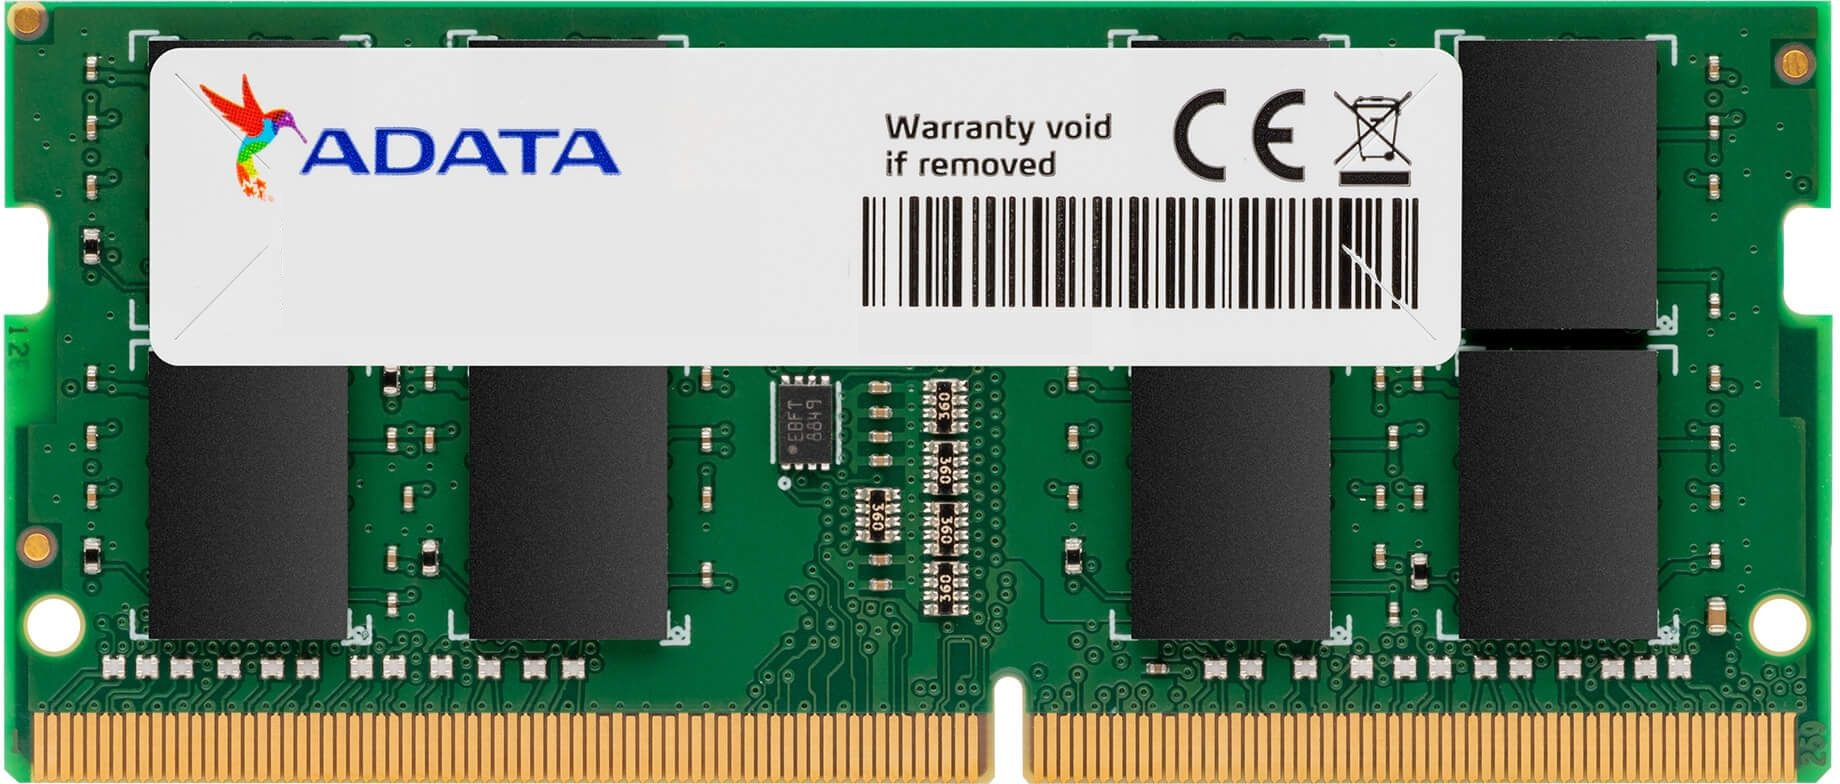   A-Data Premier AD4S26664G19-RGN DDR4 -  4 2666, SO-DIMM,  Ret